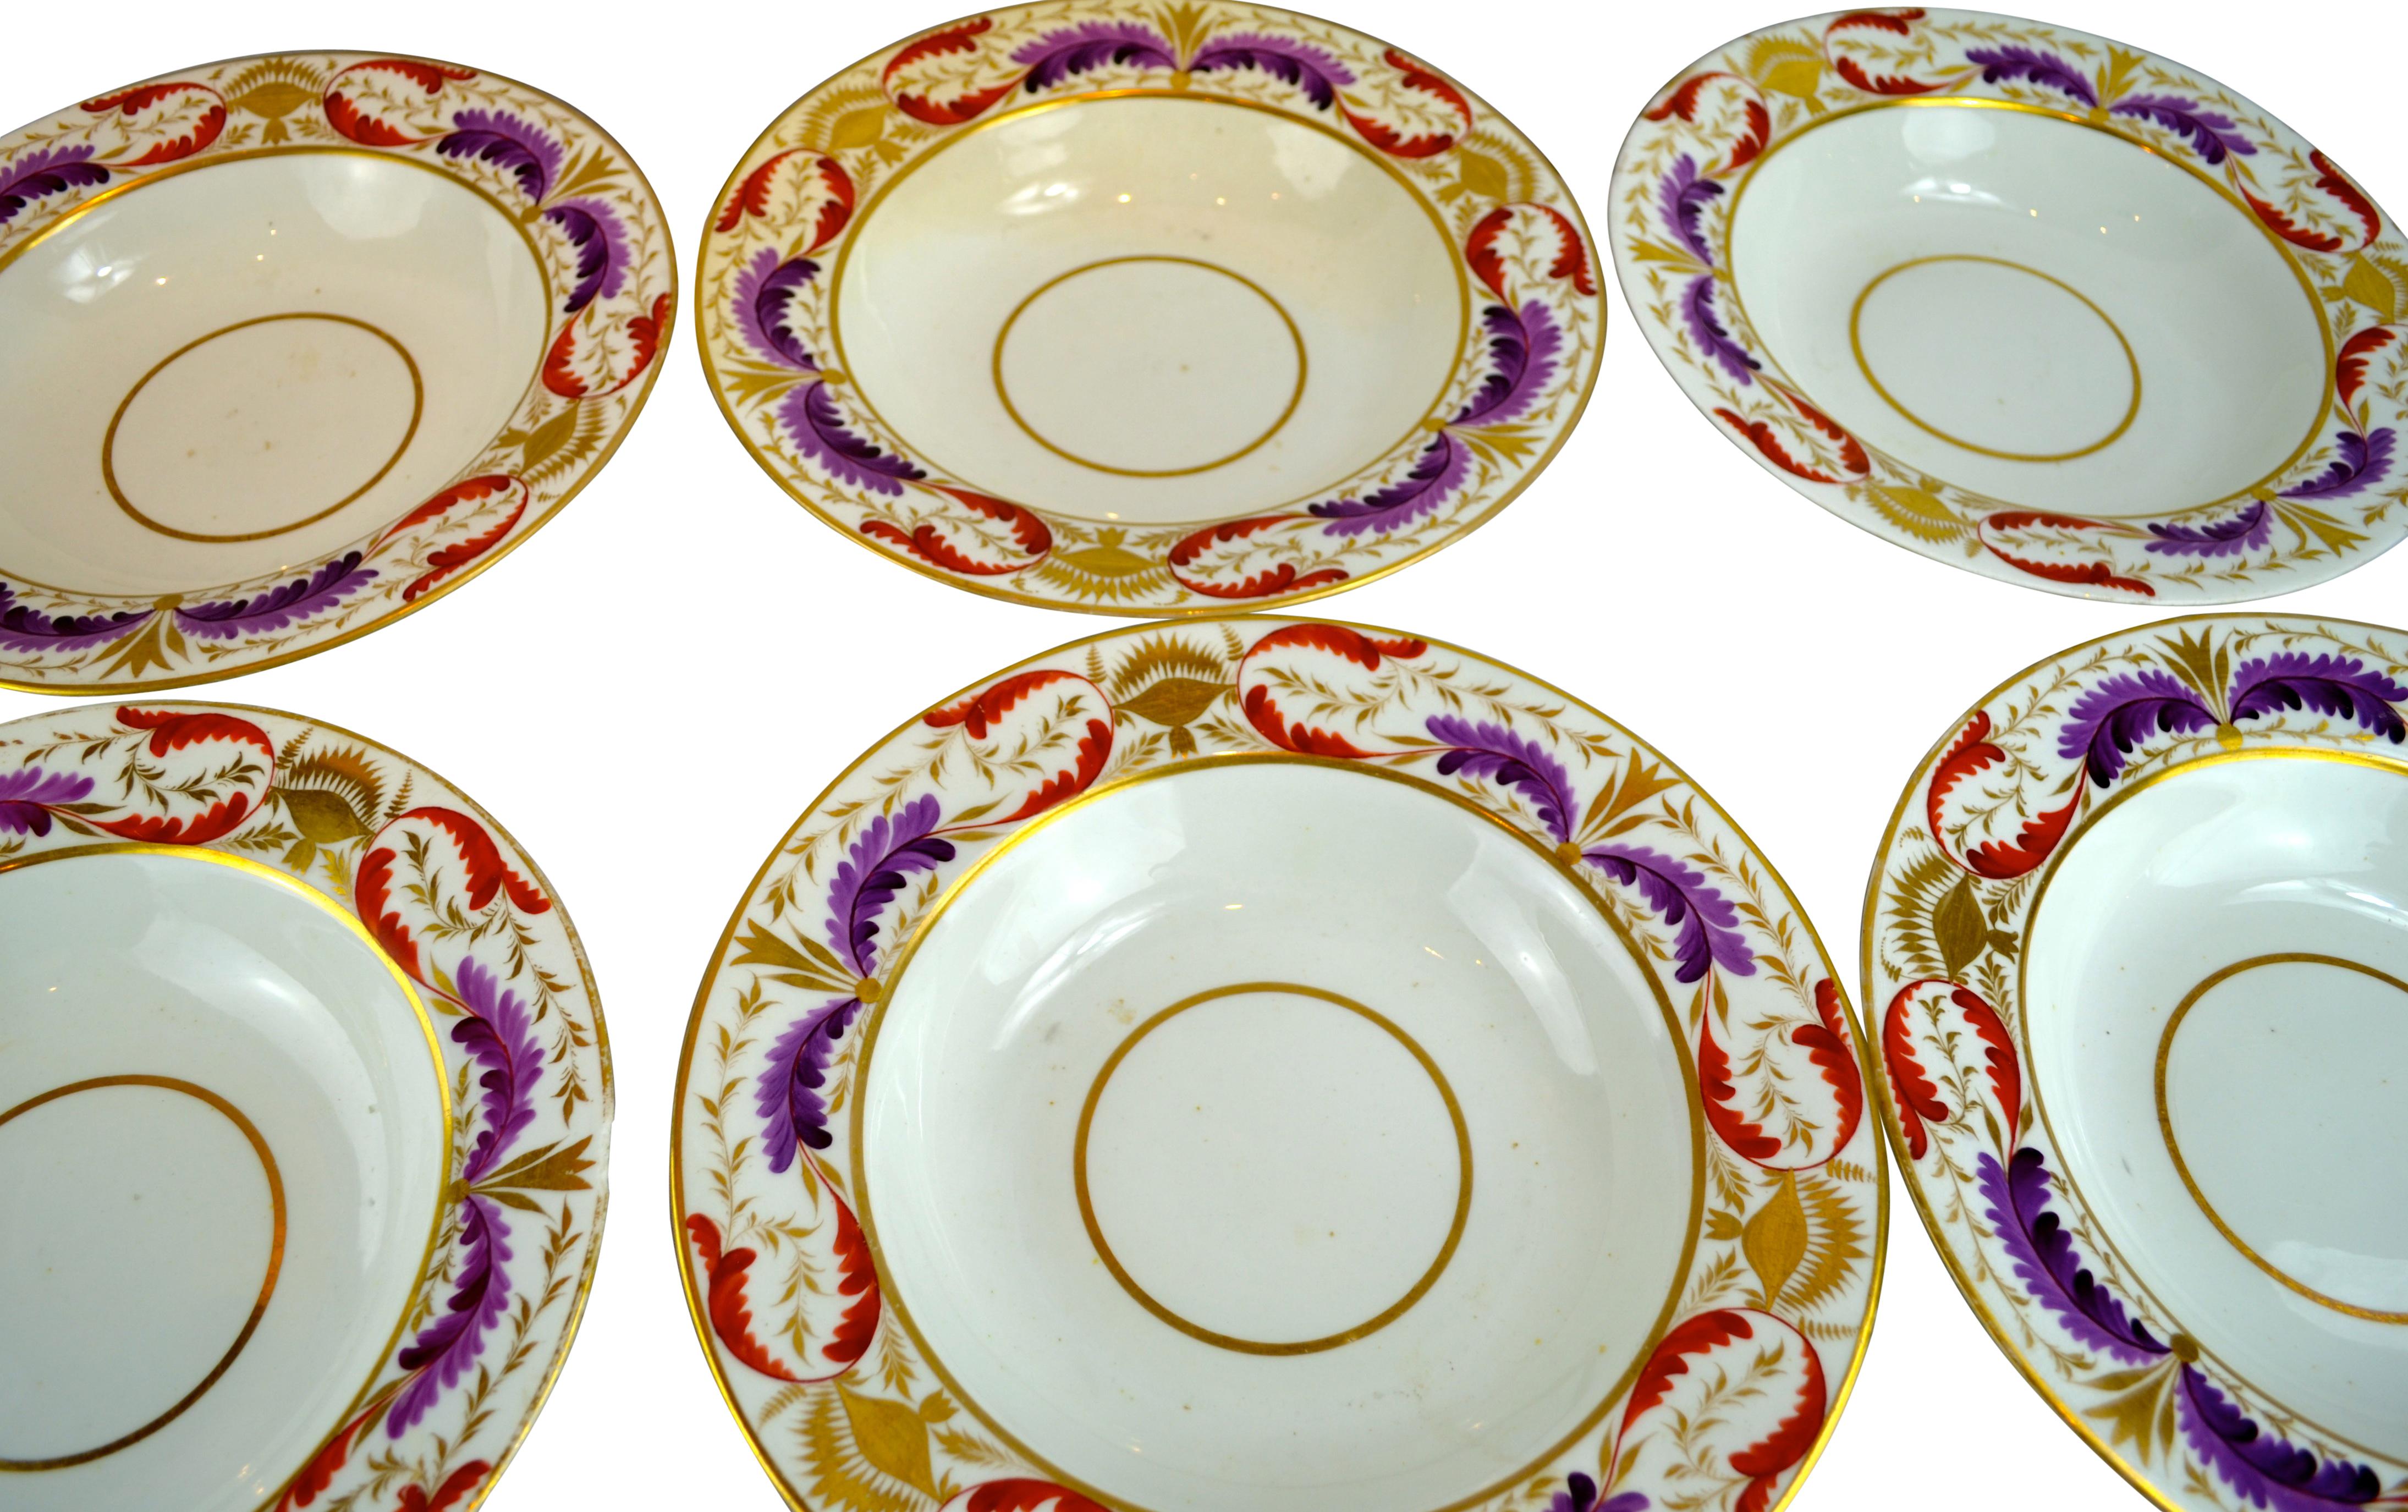 The plates with borders decorated in purple, coral and gold feathering; all stamped with red Worcester mark; three of them have the number D44 stamped under the mark, the other three do not, England, circa 1810. Except for an easily reparable chip